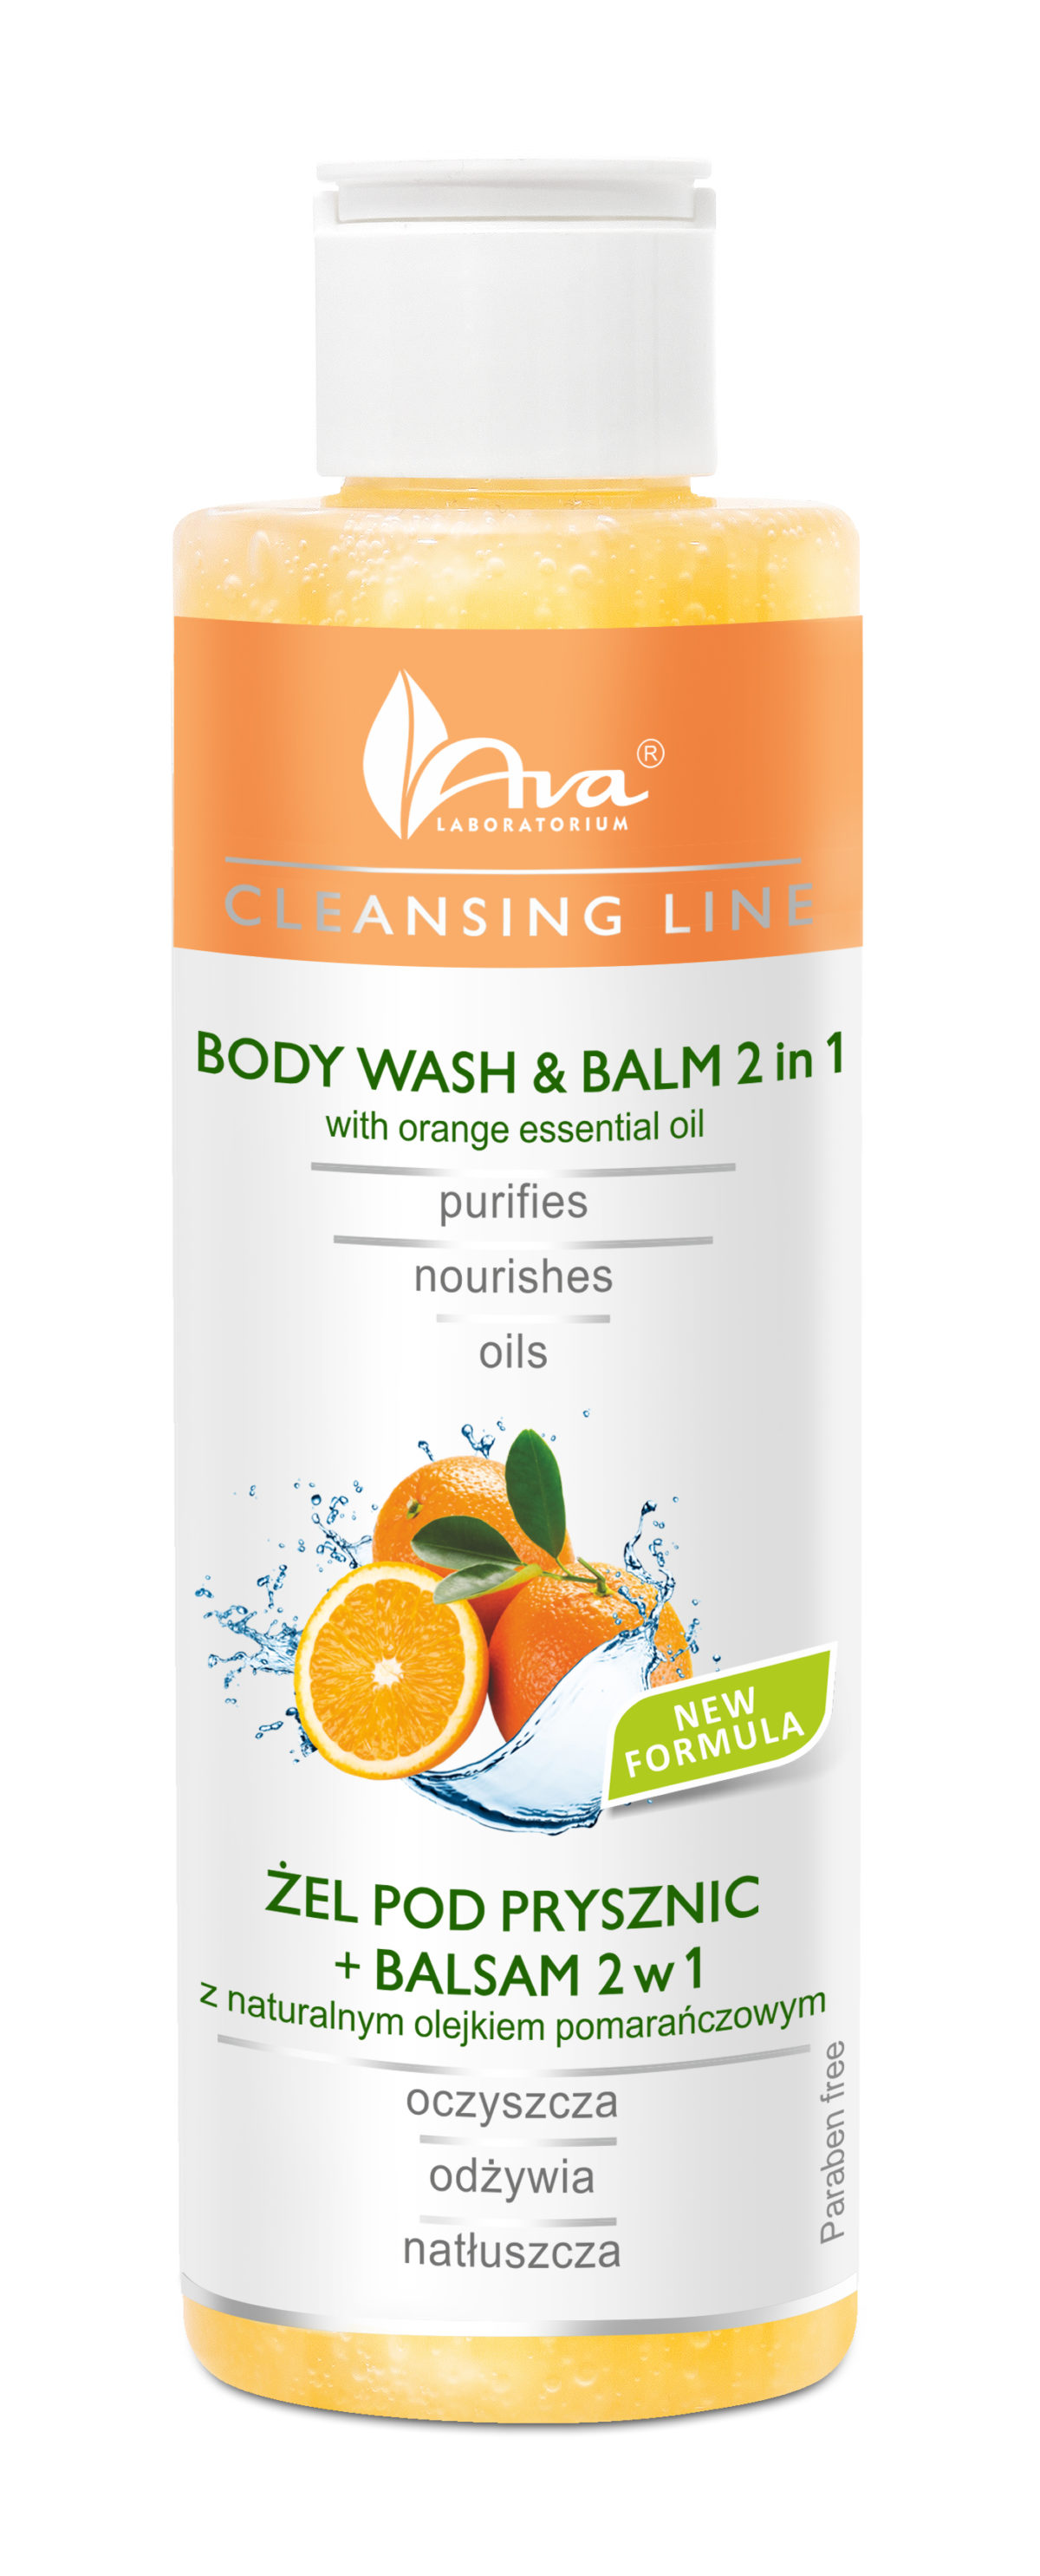 CLENSING LINE Body wash & balm 2in1 with orange essential oil